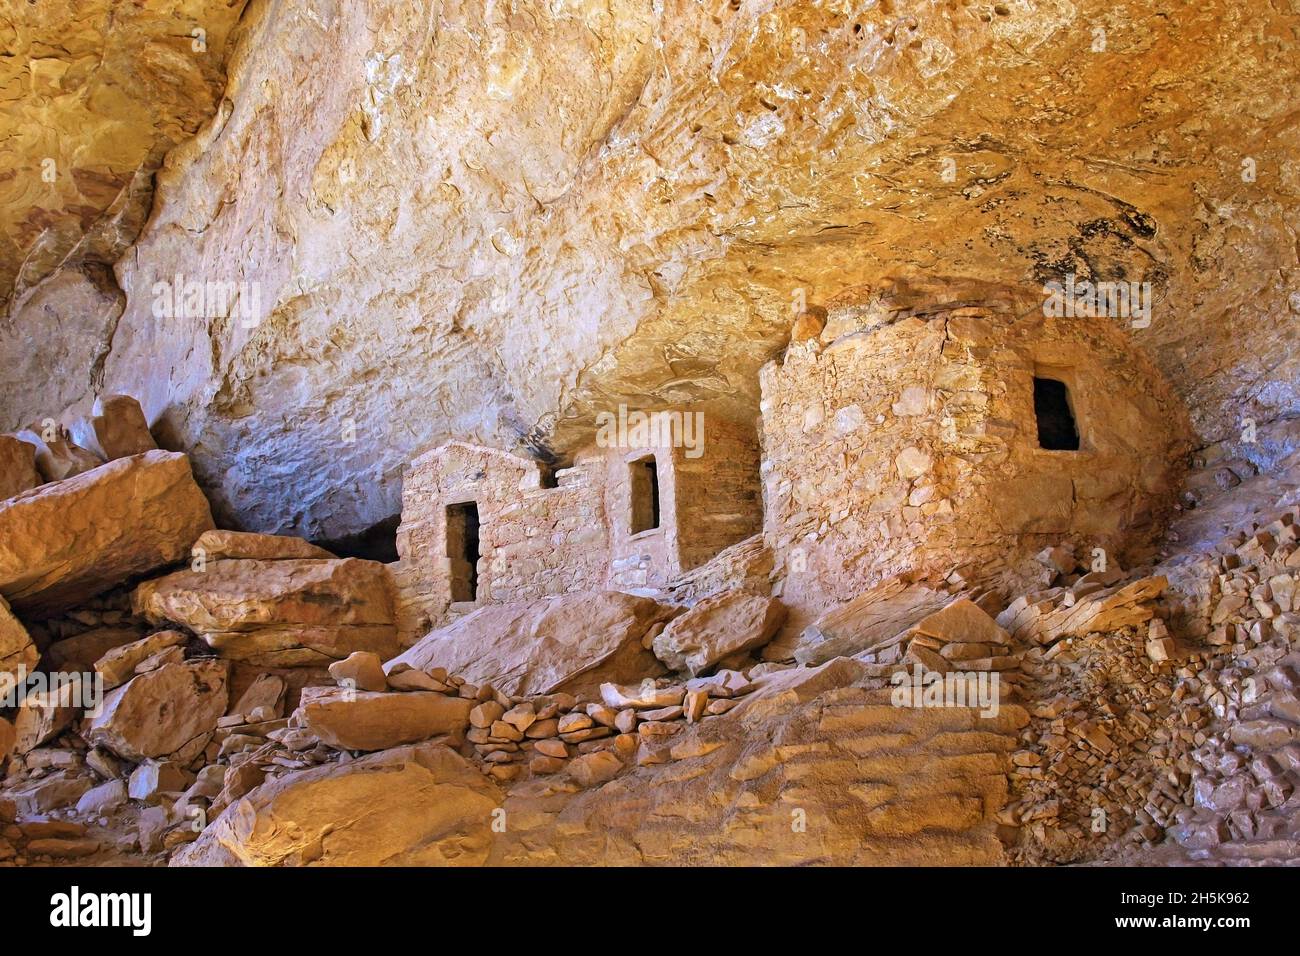 Ancient Pueblos cliff dwellings, stone structures carved into the sandstone cliffs at the Ute Tribal Park near Cortez Stock Photo